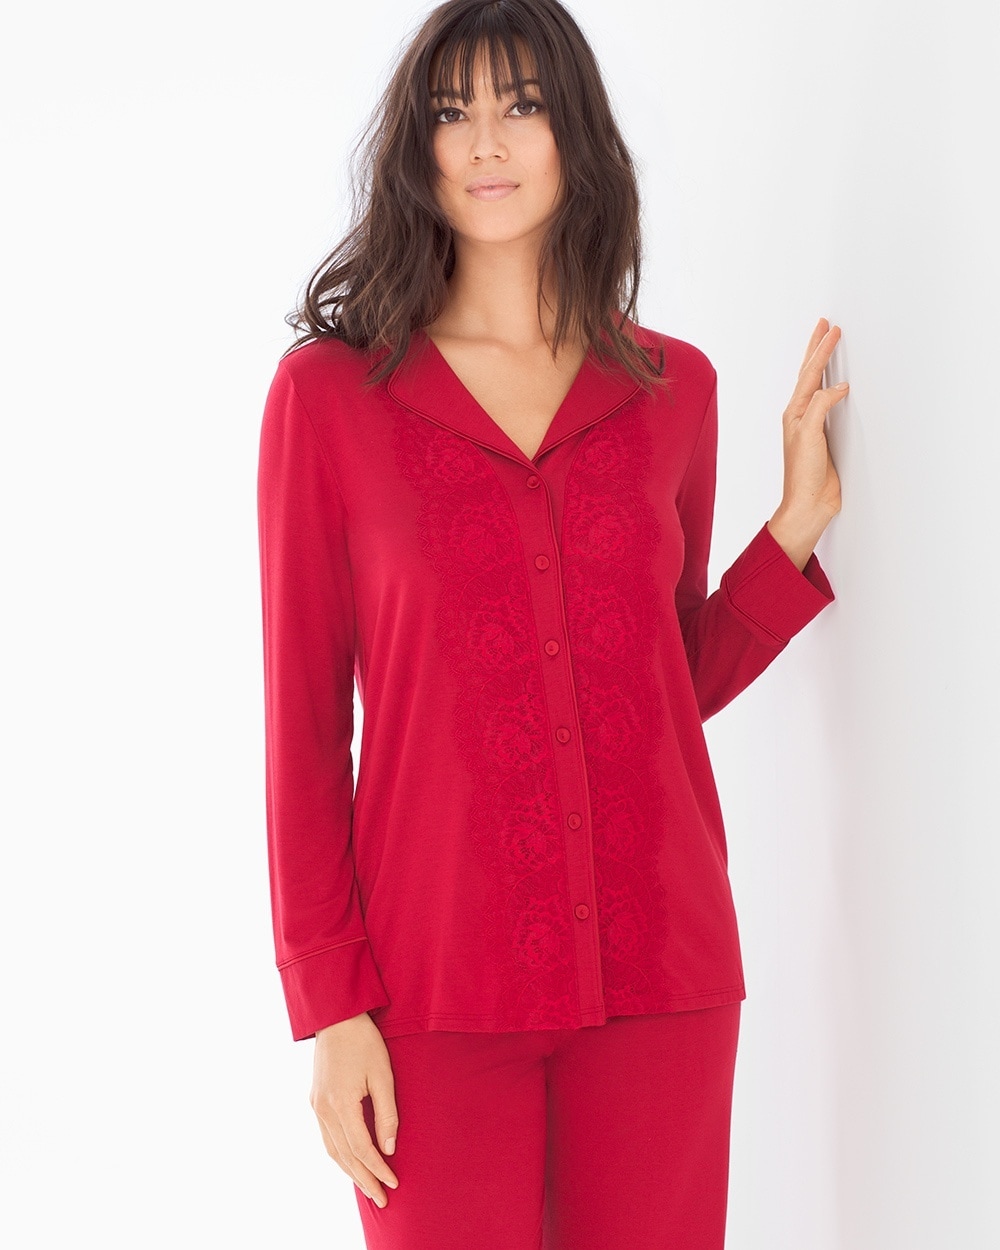 Limited Edition Breathtaking Long Sleeve Pajama Top Ruby